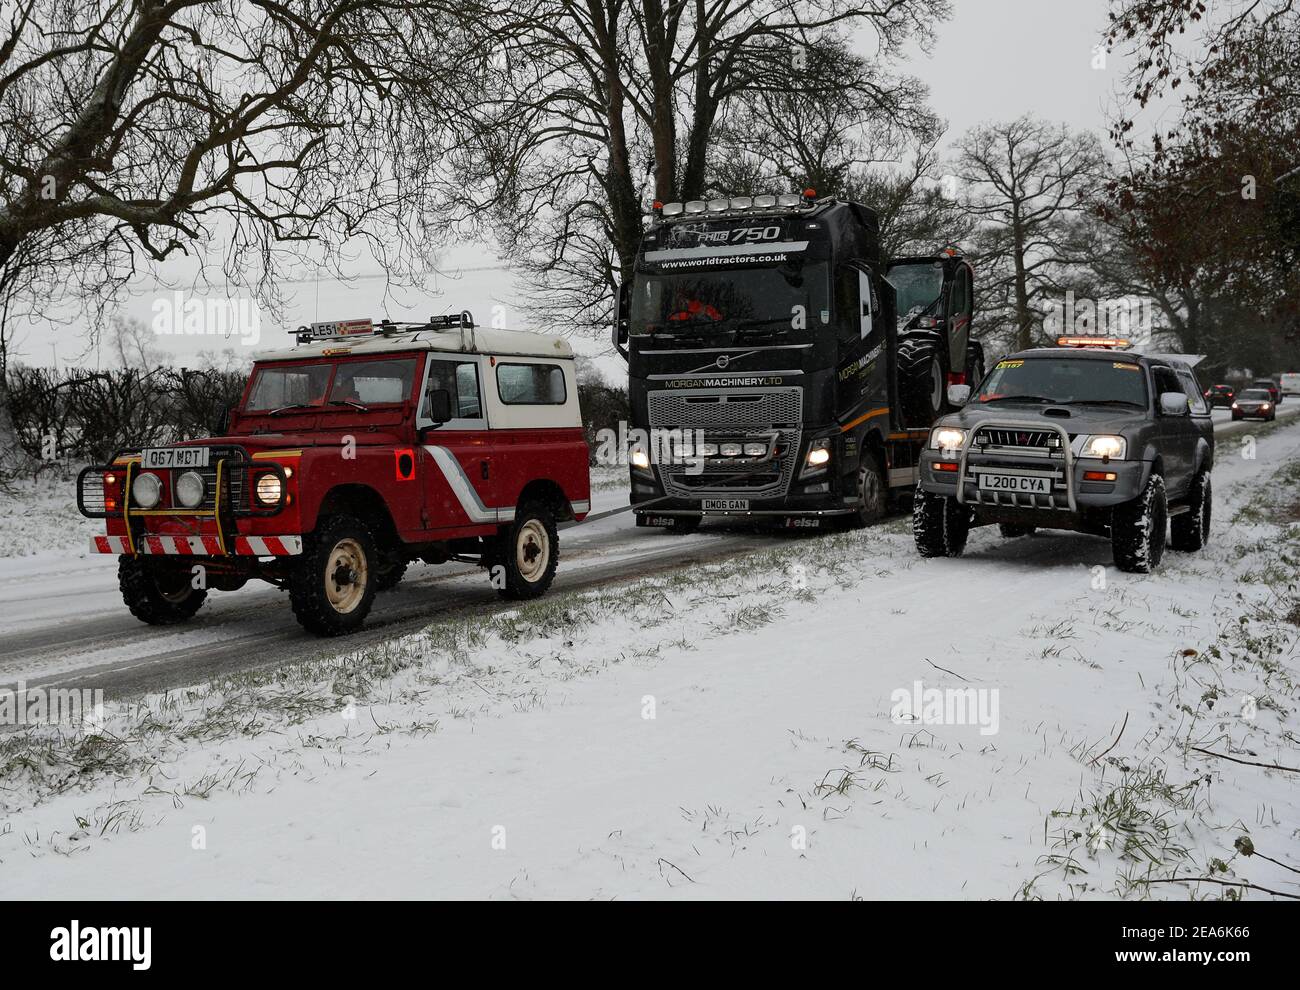 Uppingham, Rutland, UK. 8th February 2021. UK weather. A driver from Leicestershire and Rutland 4x4 Response pulls a stranded lorry up a snow and ice covered hill. Credit Darren Staples/Alamy Live News. Stock Photo